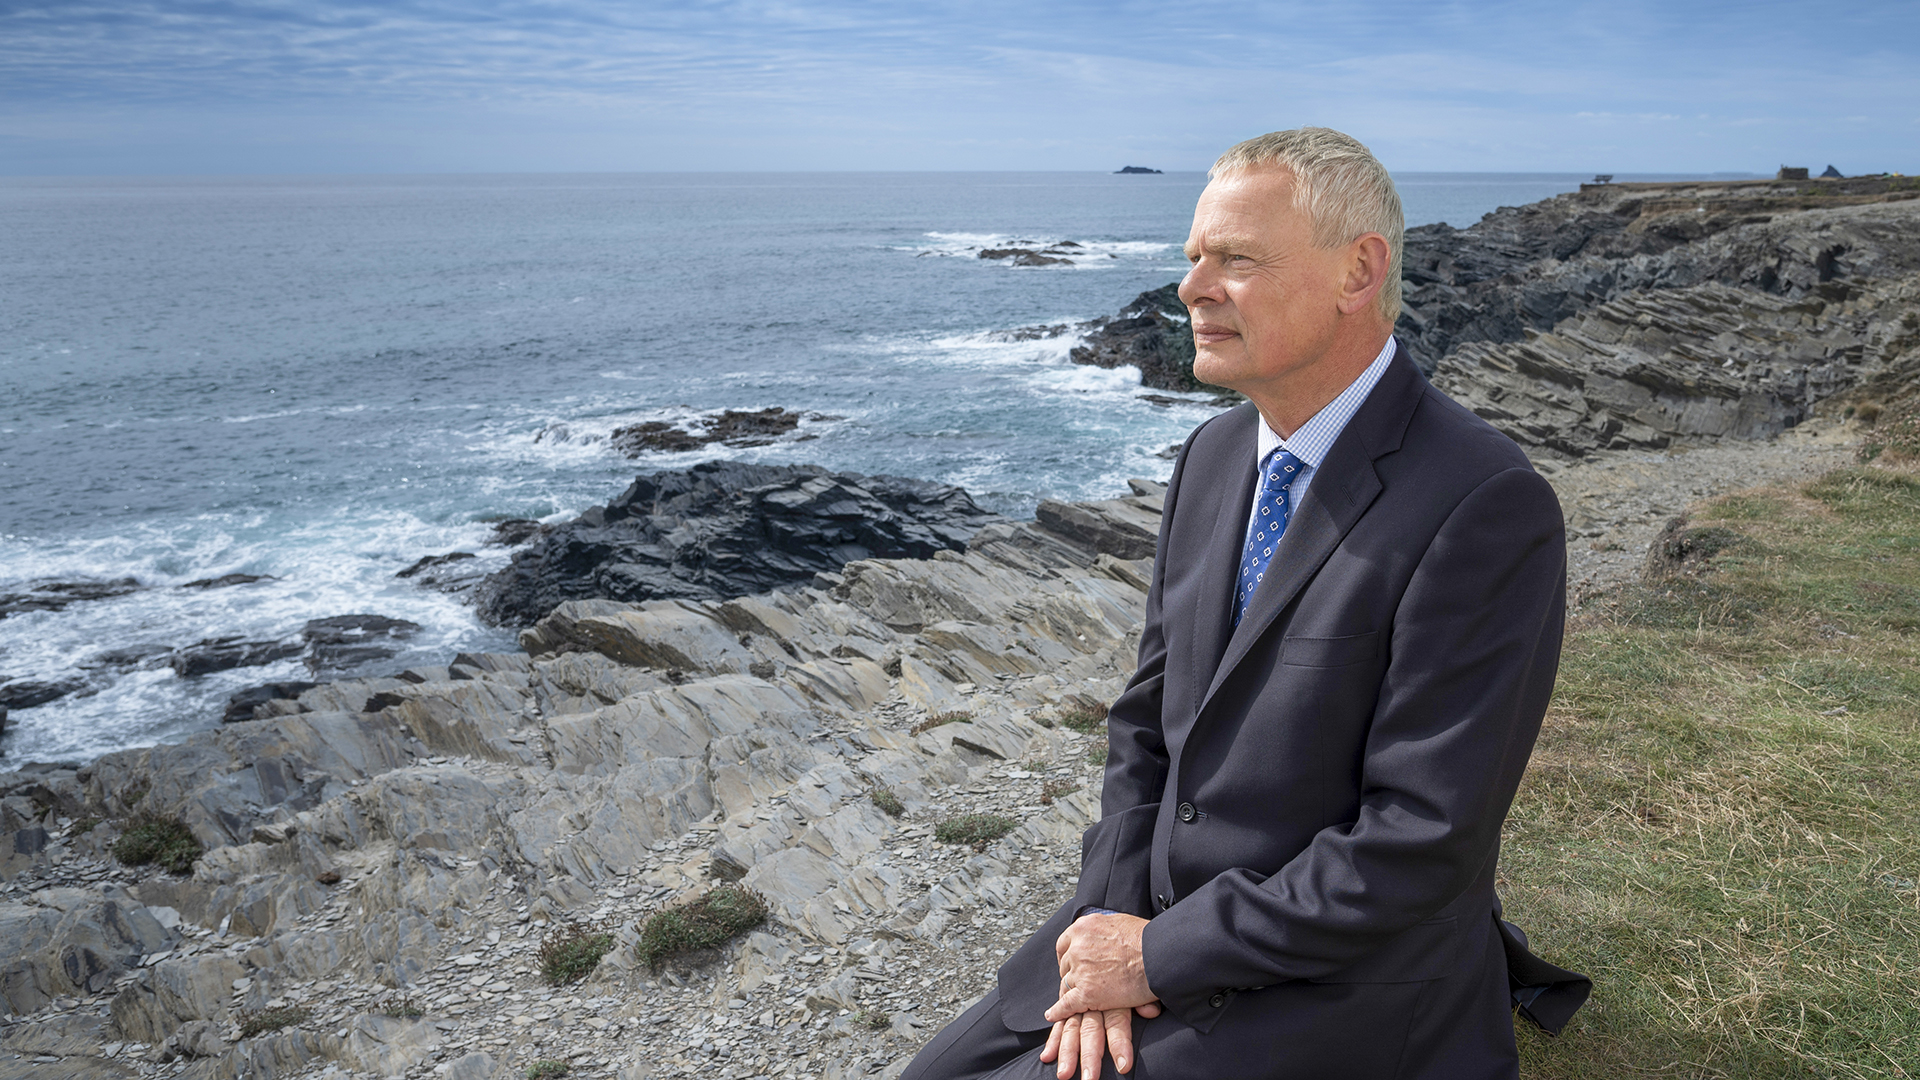 Doc Martin wears a suit and tie while he sits on a grassy hill overlooking a rocky shoreline.